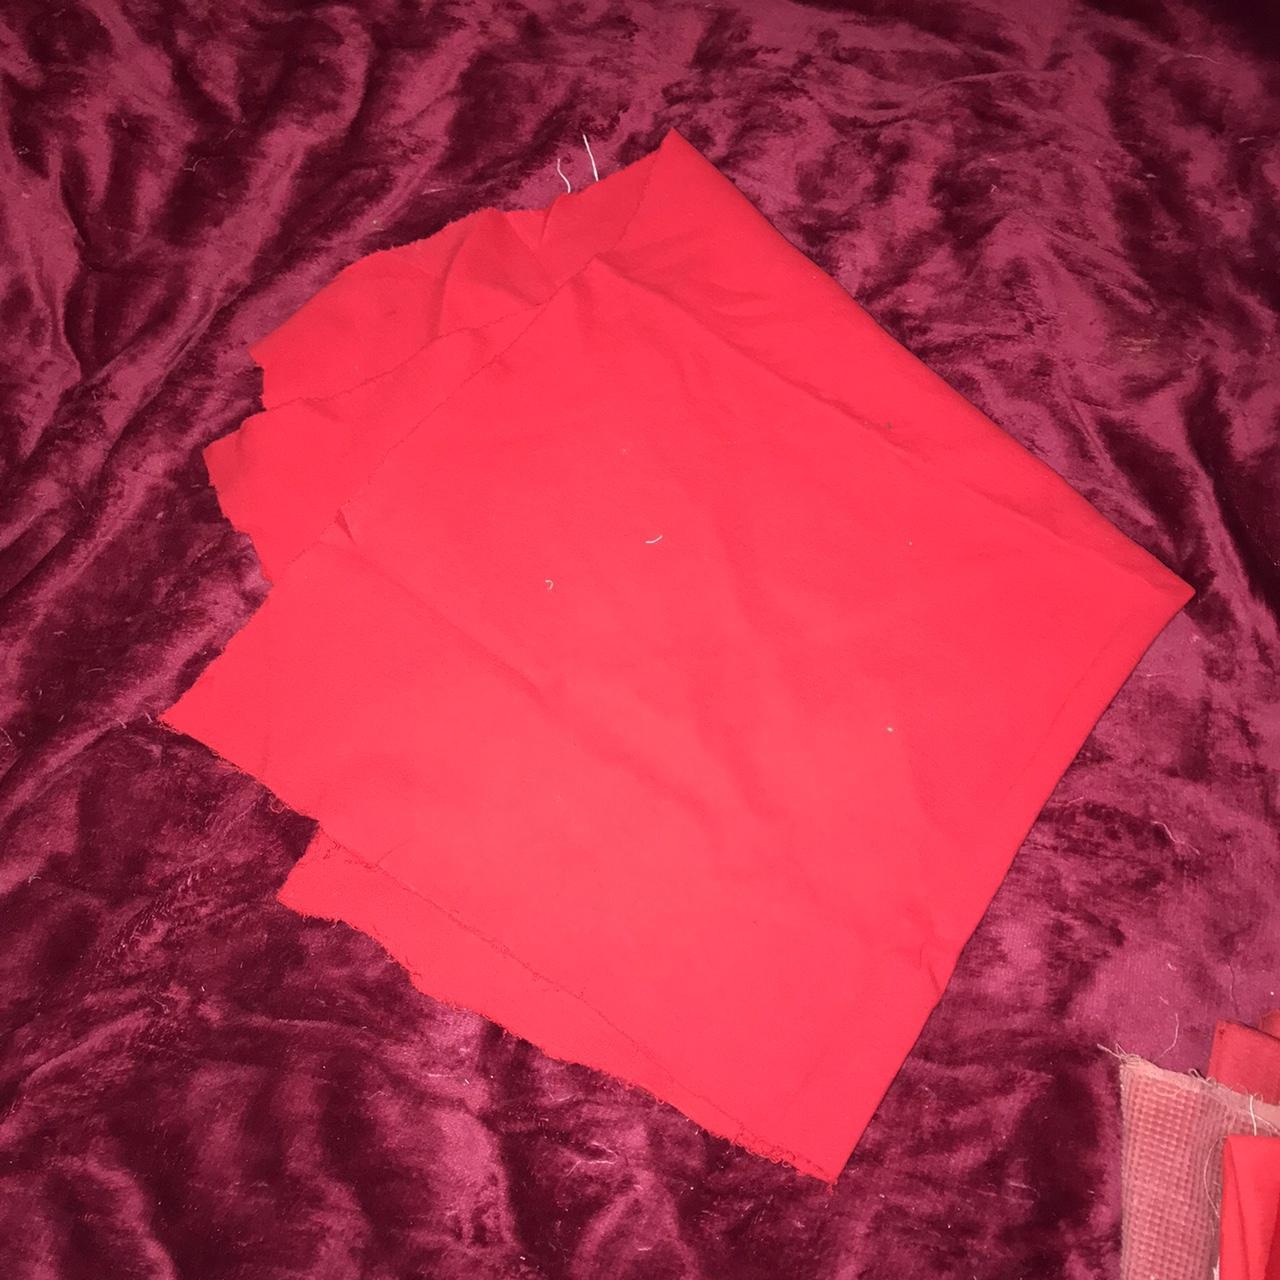 Scrap fabric alert! 17 pieces all on red and pink... - Depop